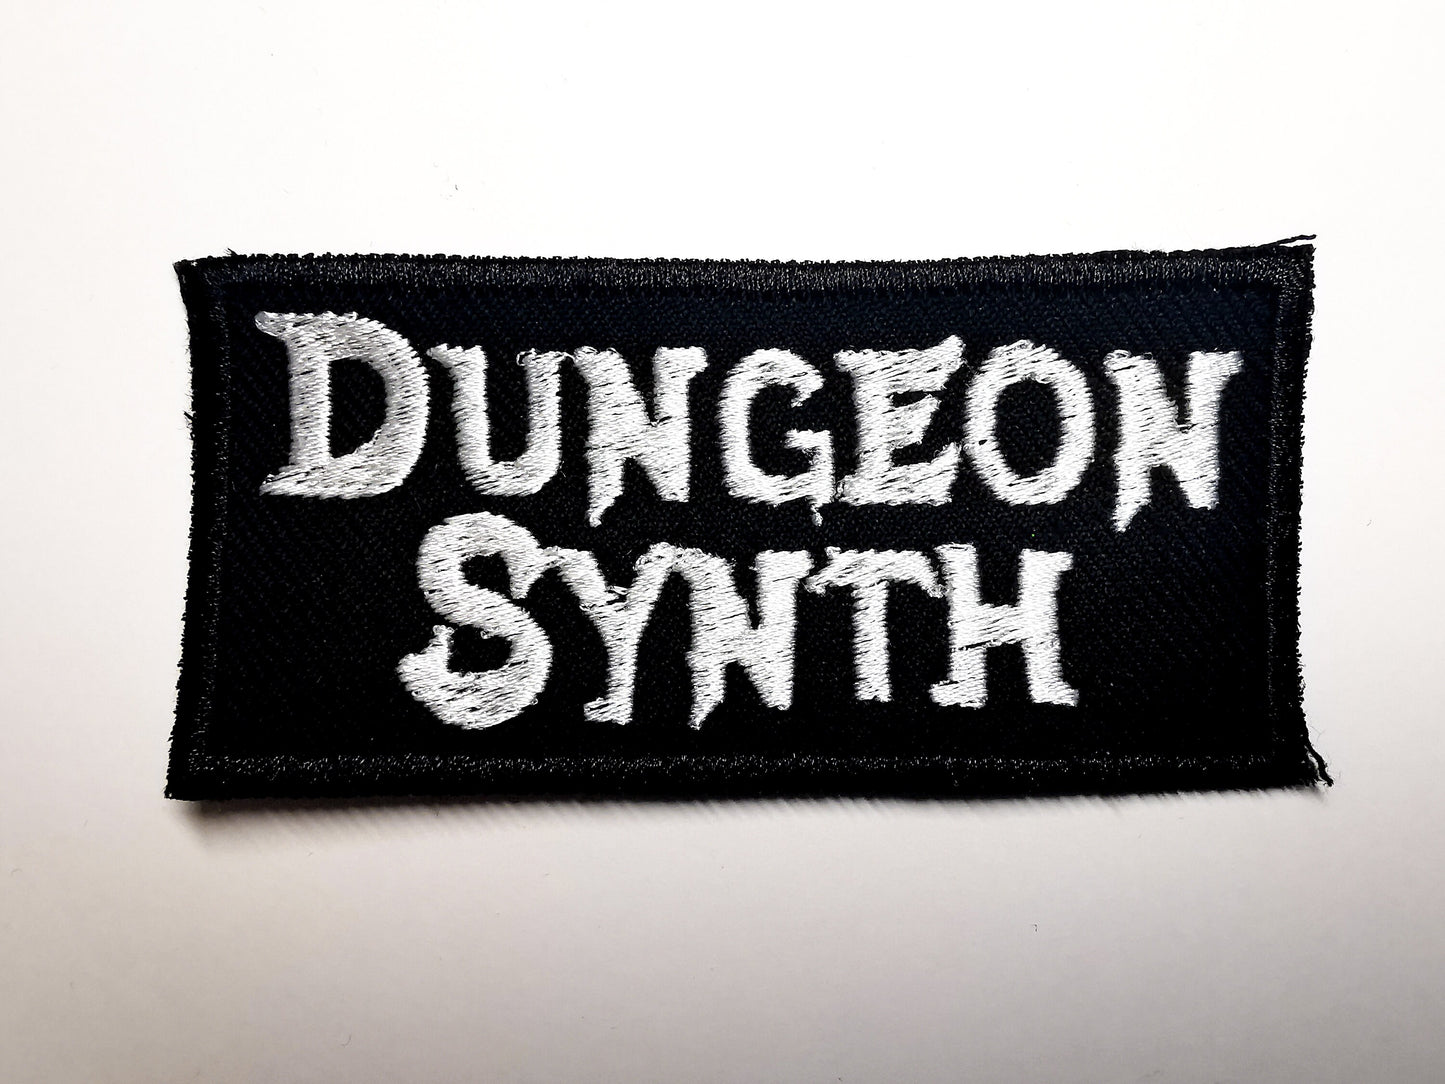 Dungeon Synth Embroidered Patch Ambient Summoning Caladan Brood Synth Black Metal Atmospheric